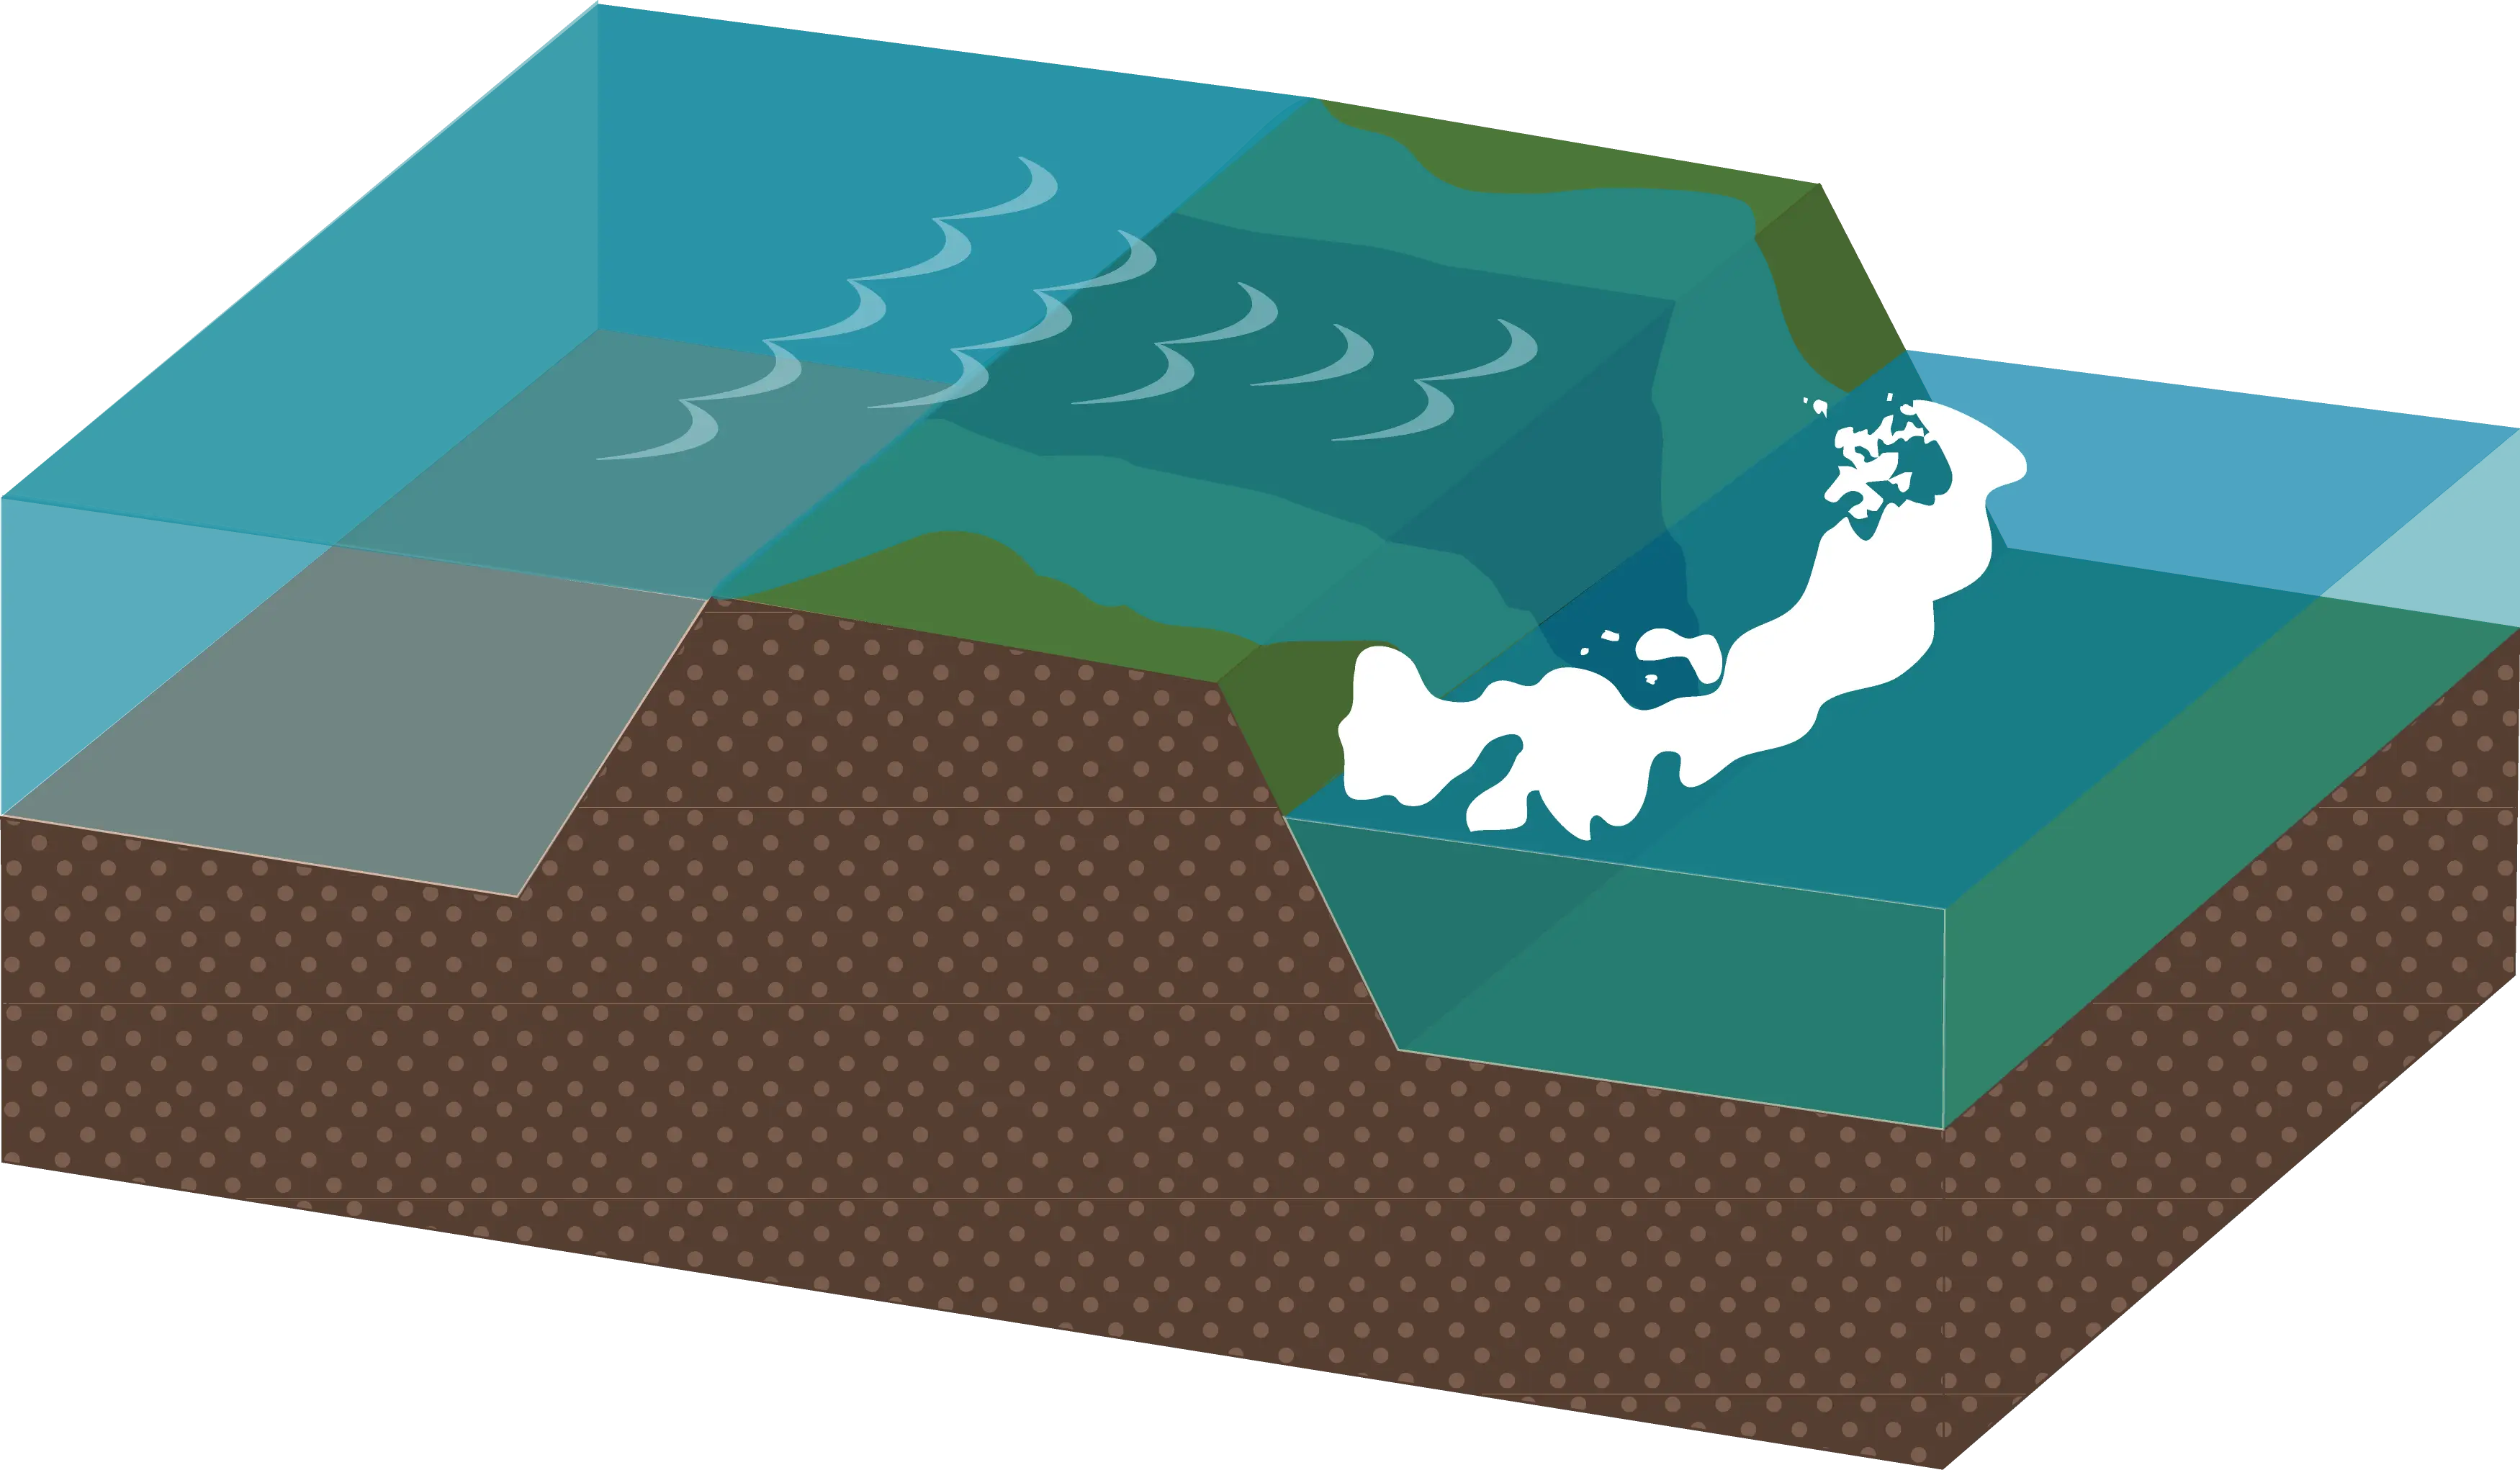 Diagram of levee - Overtopping